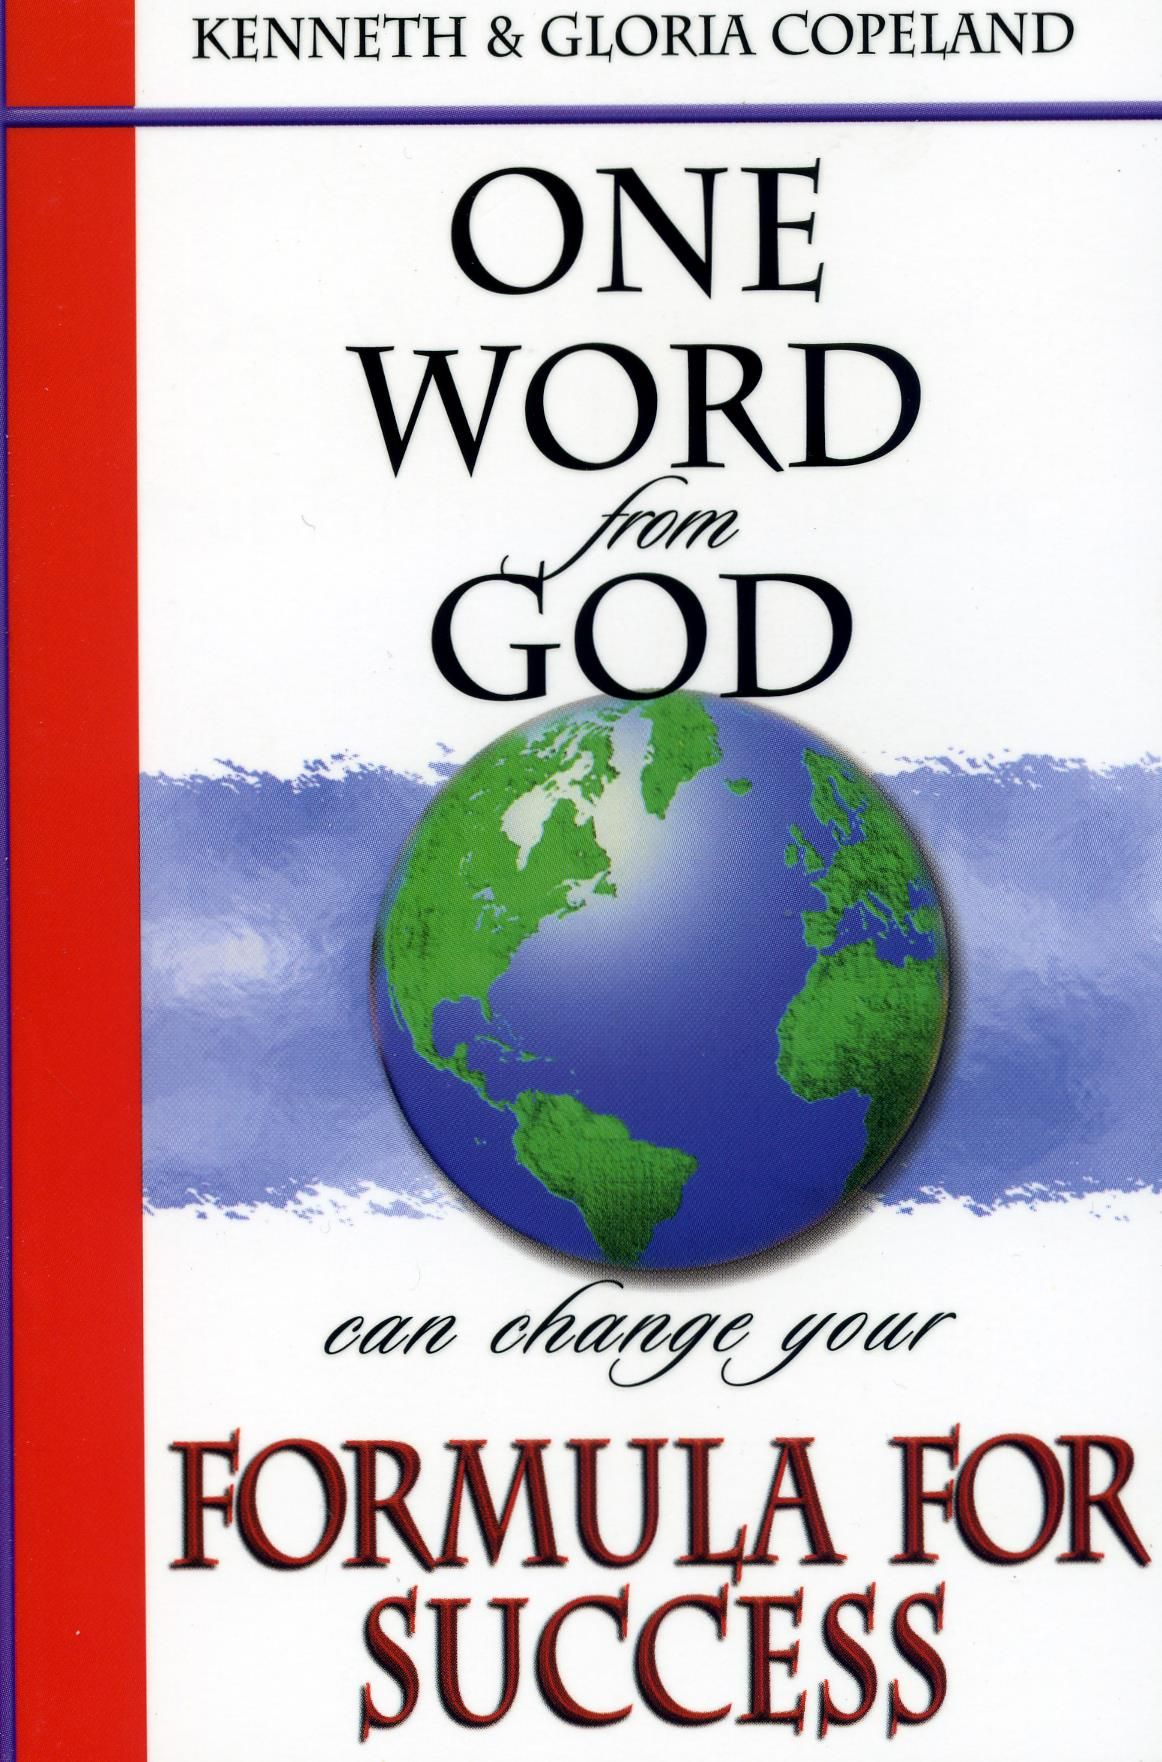 Englische Bücher - K. & G. Copeland: One Word from God can change your Formula for Success